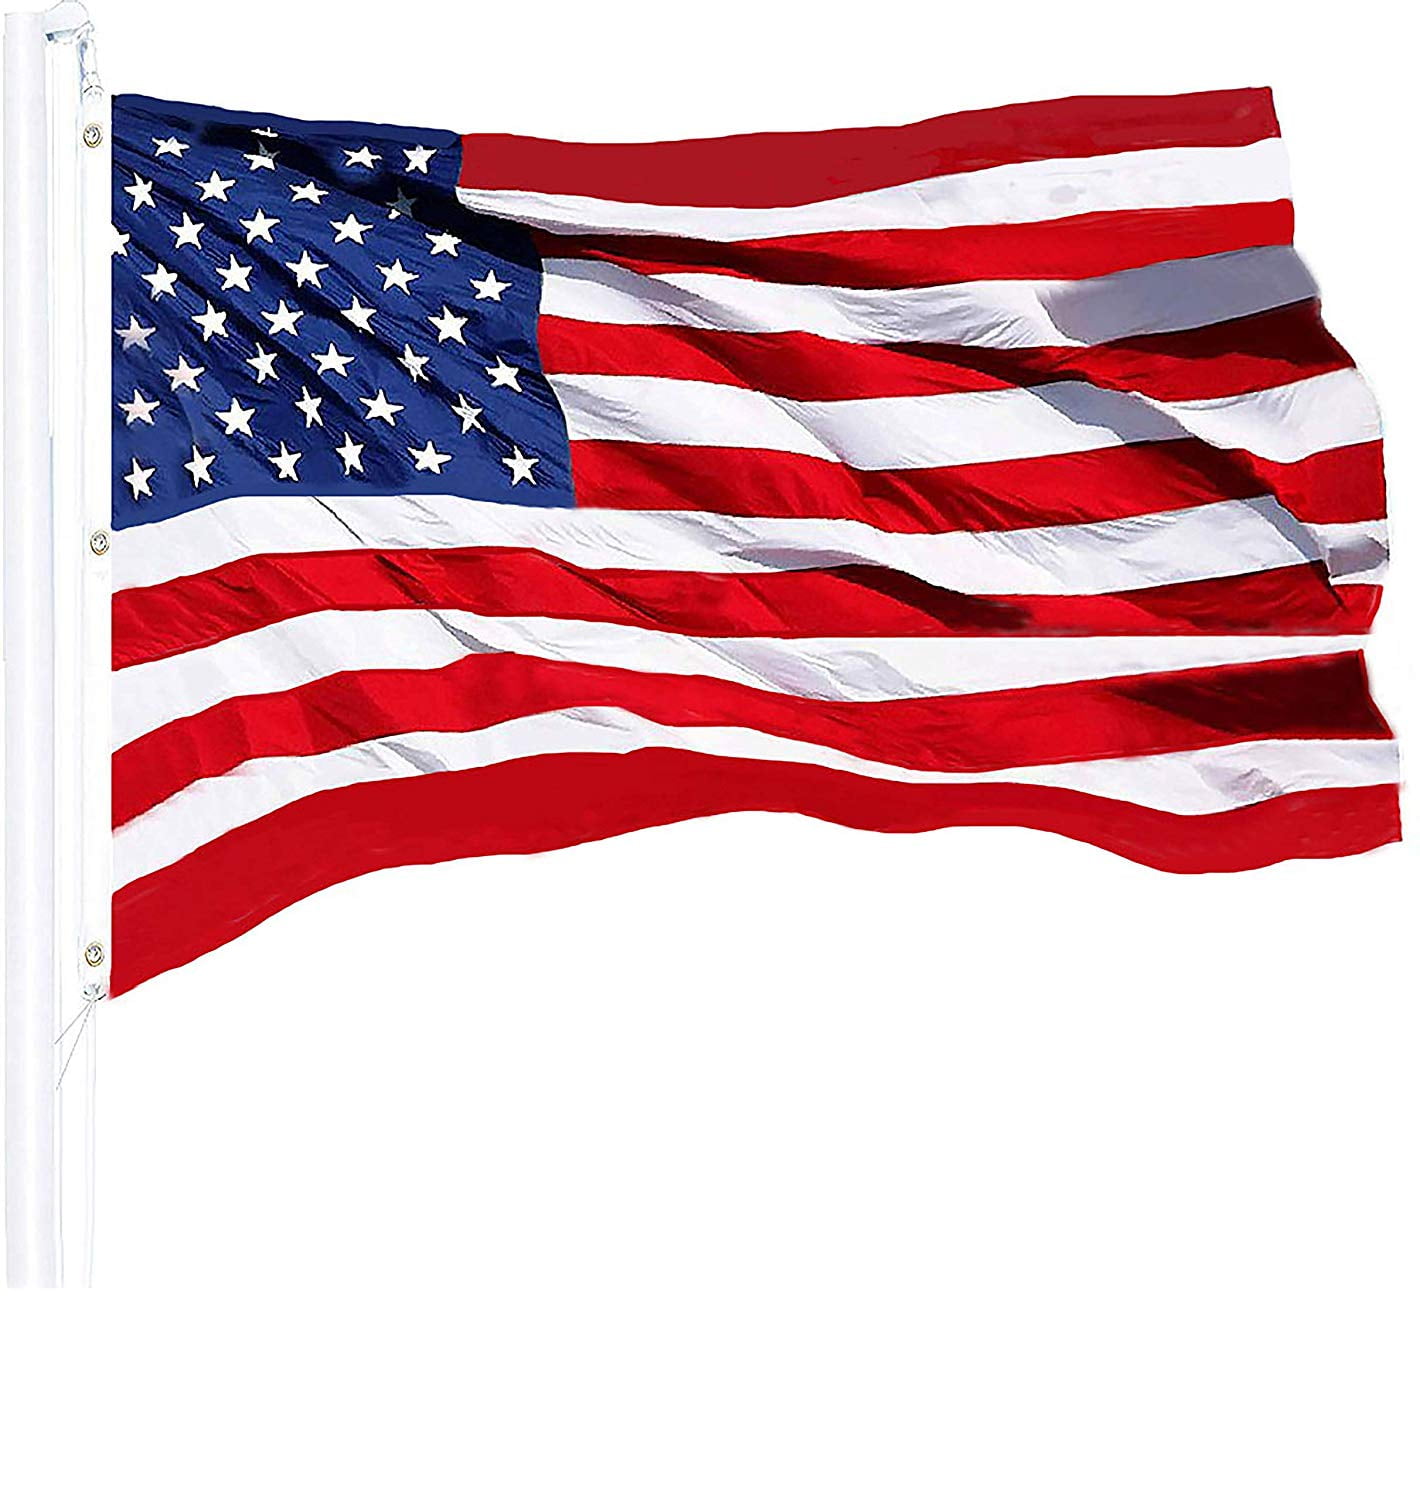 US Flag 5x8 FT 100% Made in USA TOPFLAGS American Flag 5x8 FT Outdoor Heavy Duty Nylon USA Flag with Embroidered Stars and Sewn Stripes Brass Grommets